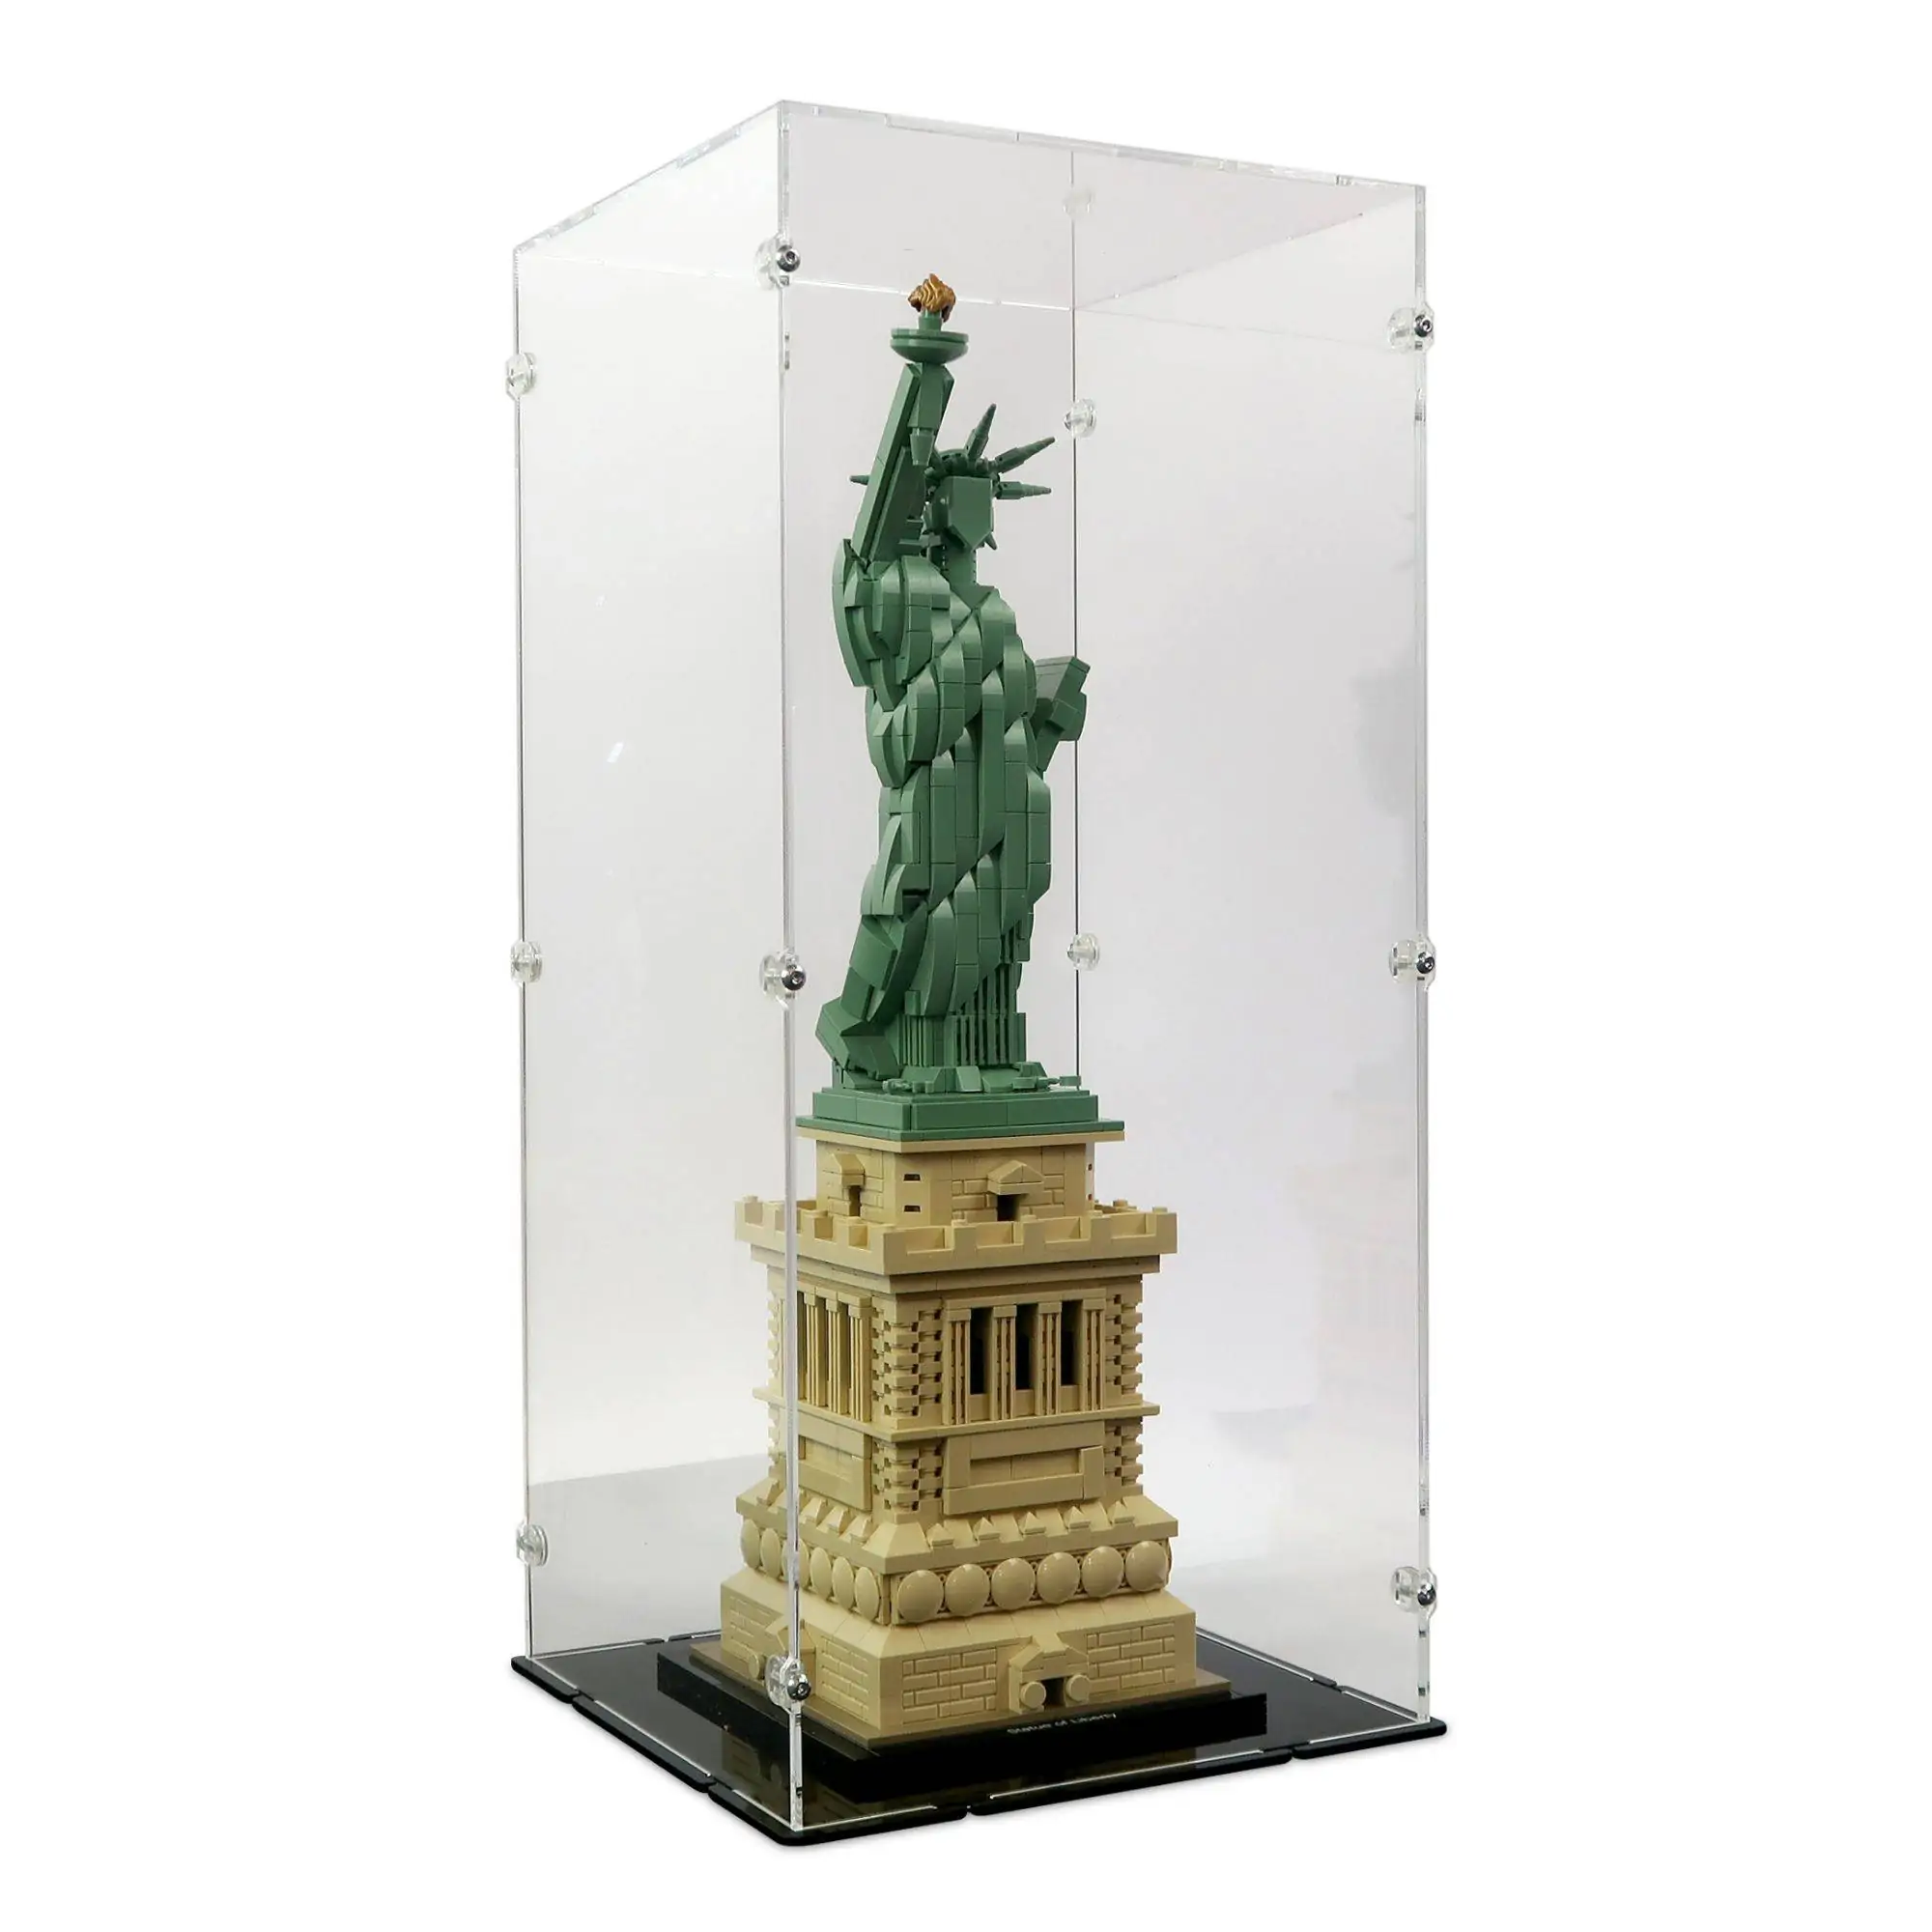 LEGO Architecture Statue of Liberty Model Building Set 21042